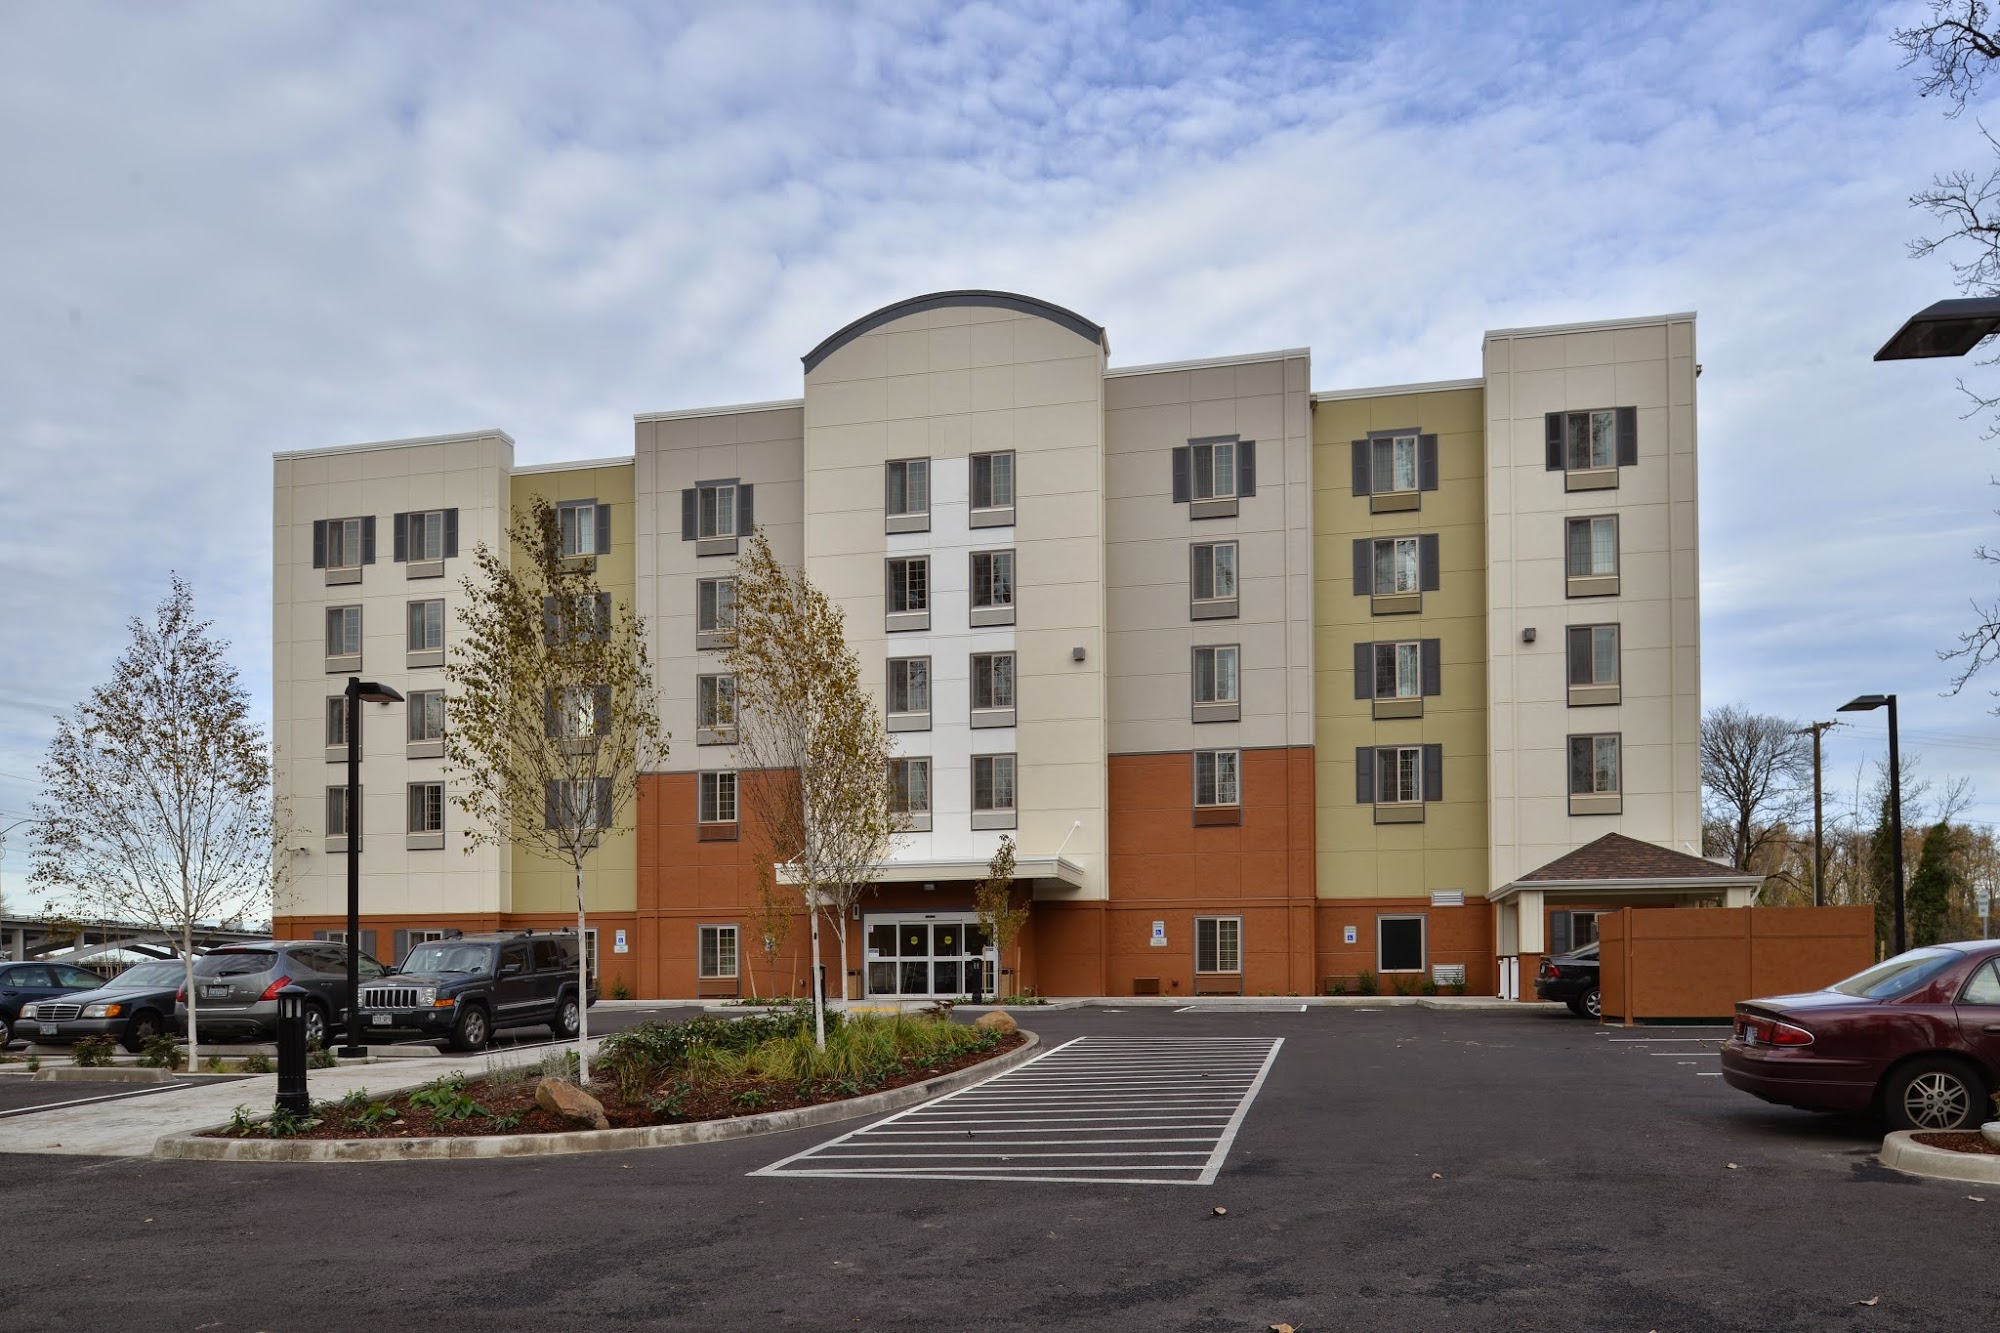 Candlewood Suites Eugene Springfield, an IHG Hotel